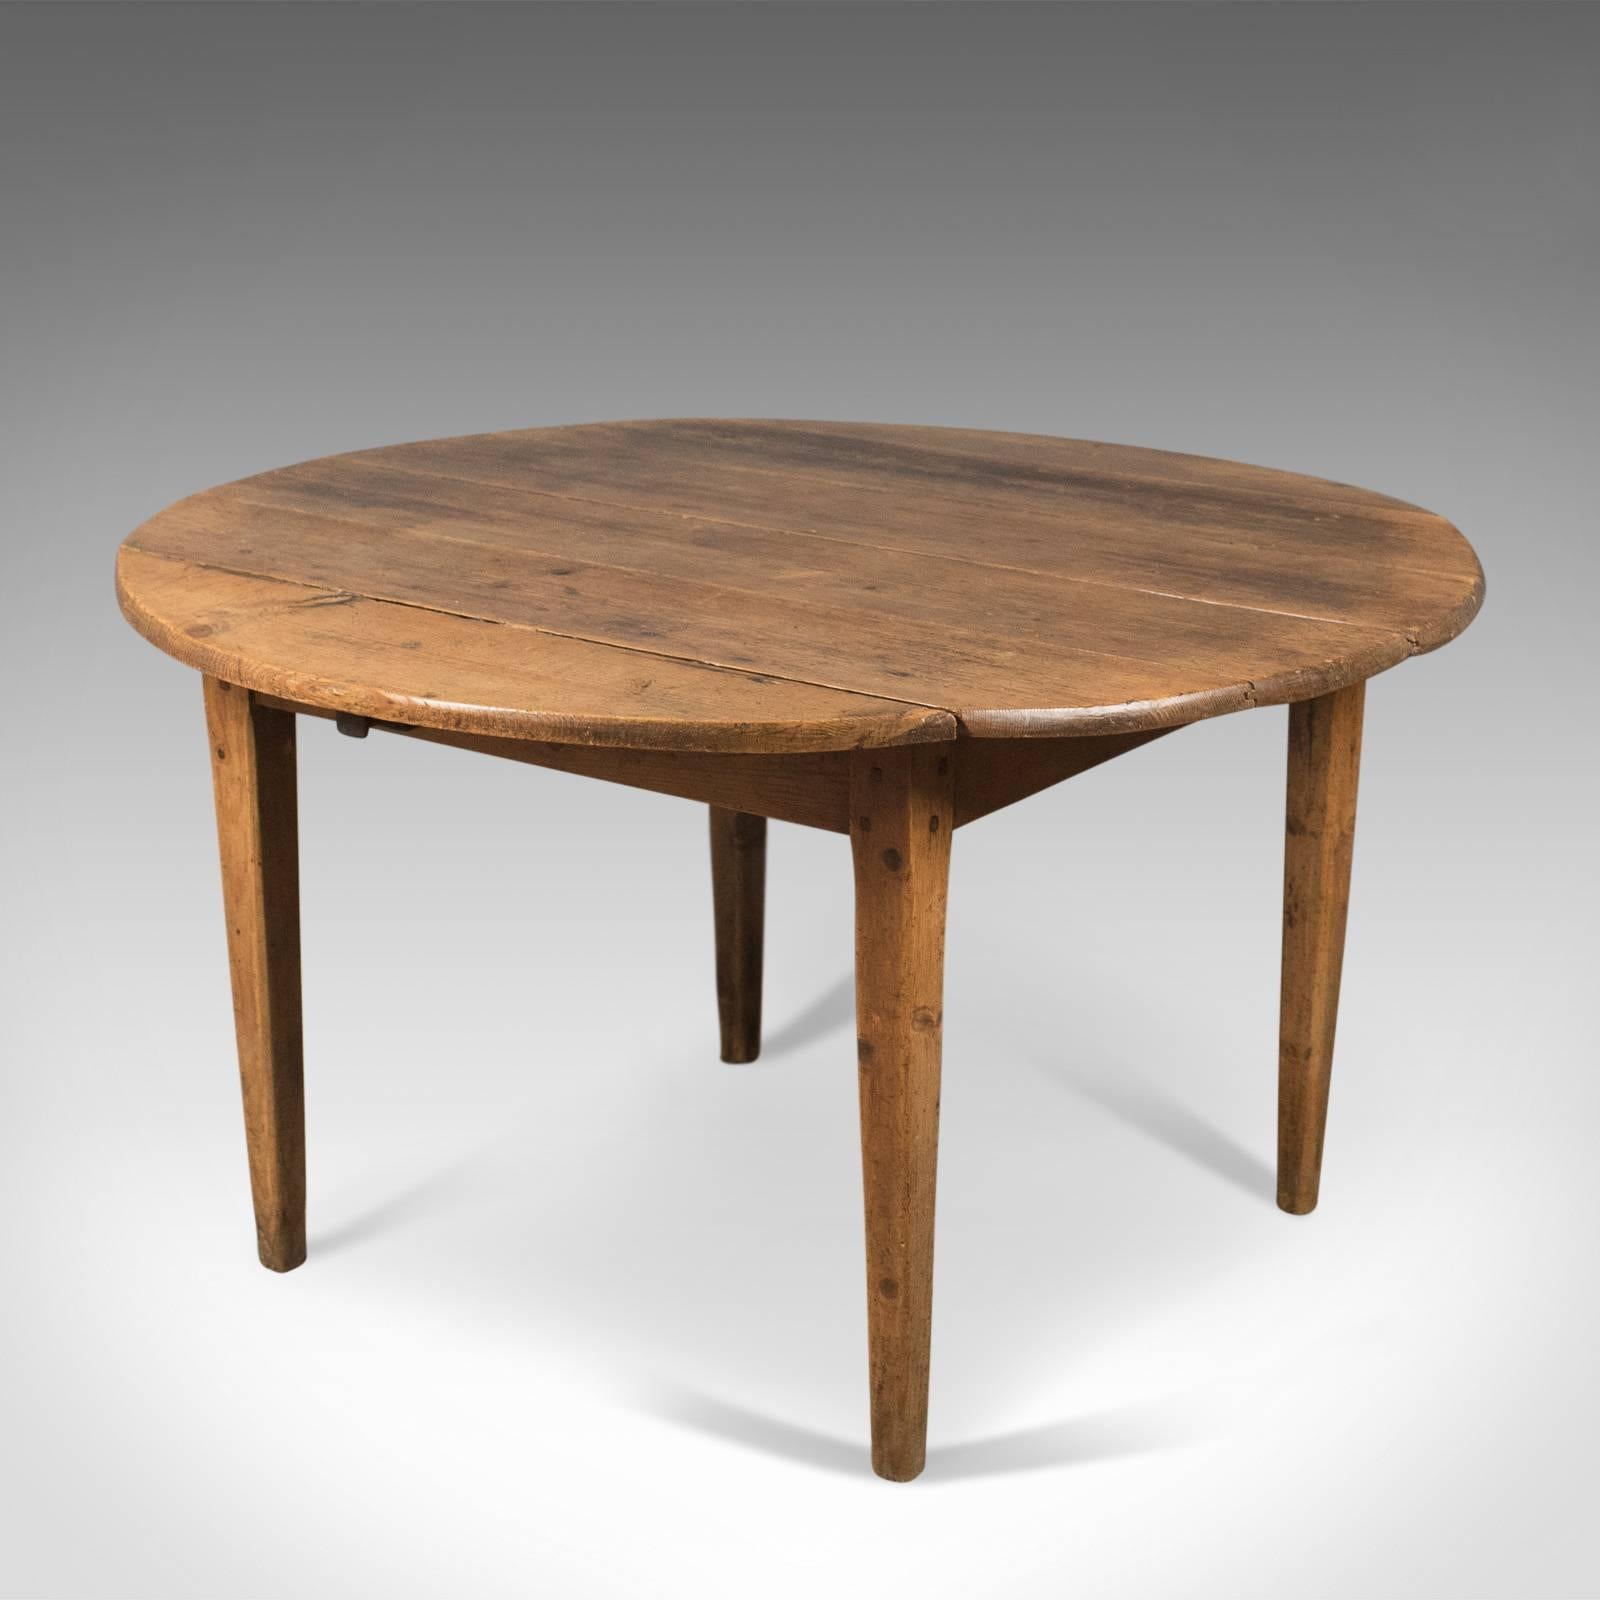 This is an antique pine table, French, kitchen dining table dating to the mid-19th century, circa 1850.

Desirable color and aged patina to the waxed antique pine
Raised on square section tapering legs with pegged joints
Four, broad plank top